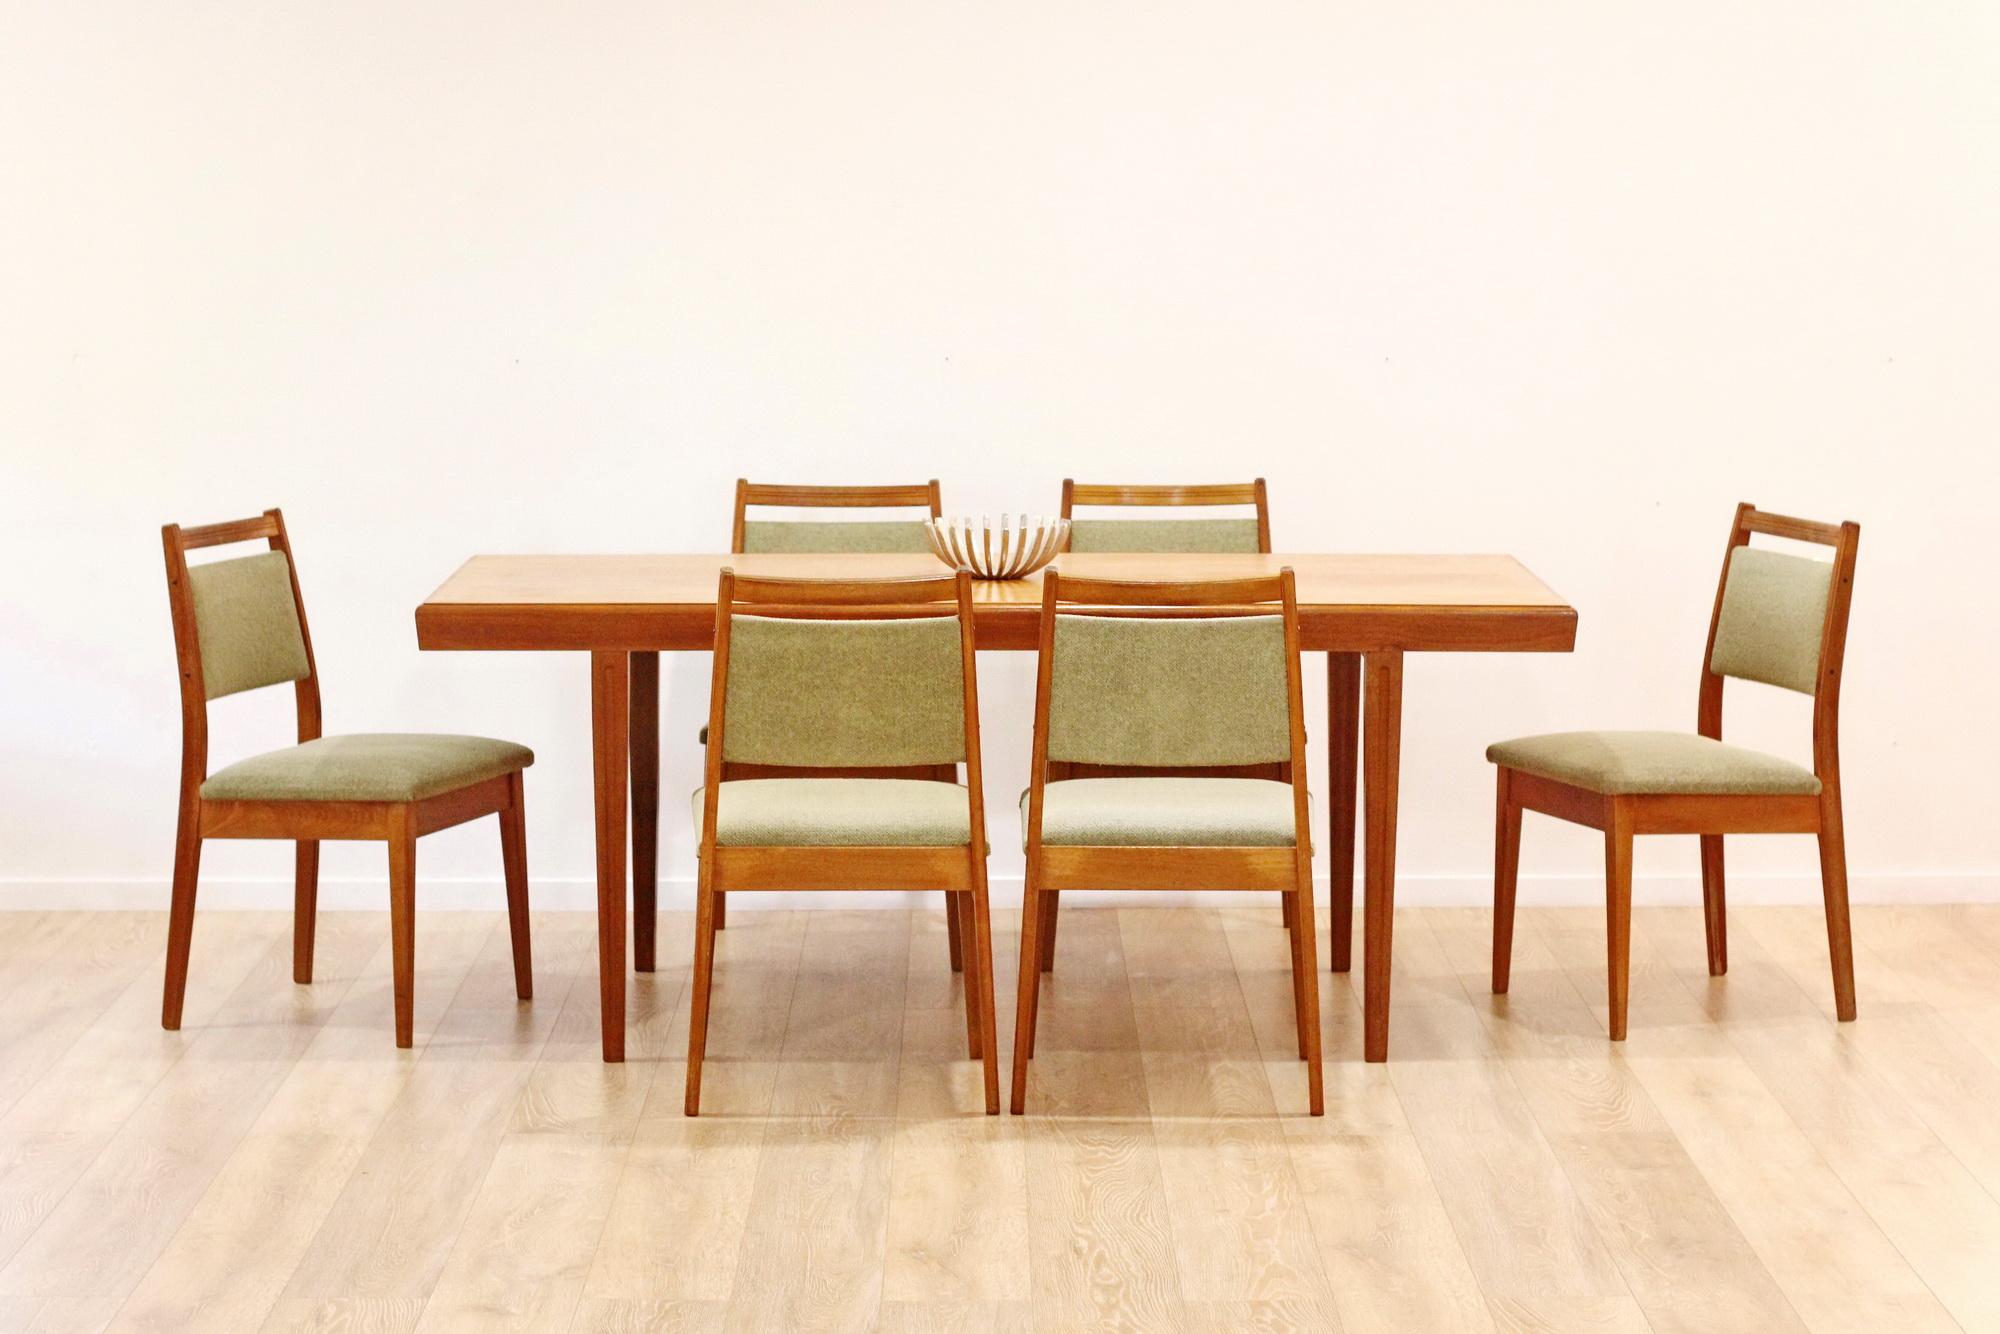 One of Otto Larsen's most iconic design. 

This is a very early offering distinguished by higher quality mahogany and construction materials. 1960s.

Beautiful clean lines, beautiful timber finishes and an elegant lightness of form - it's hard